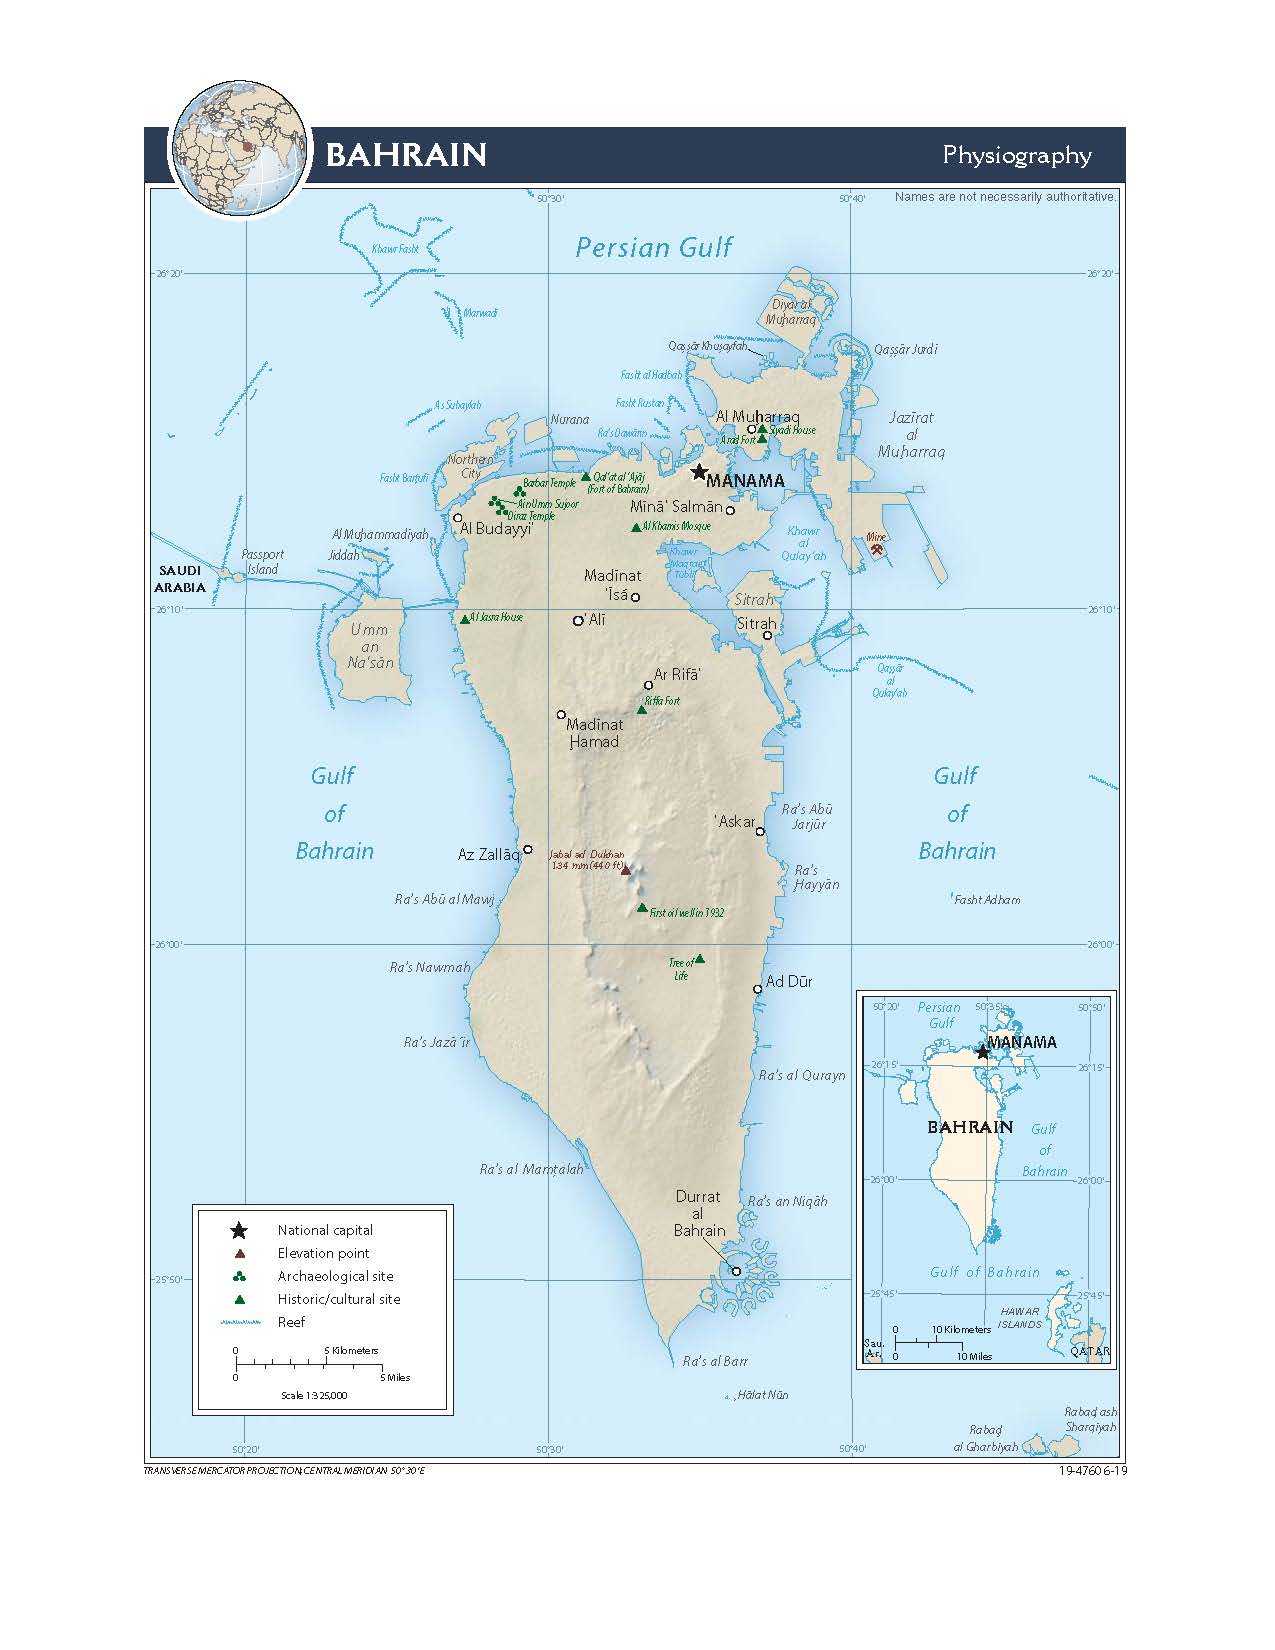 Physiographical map of Bahrain.